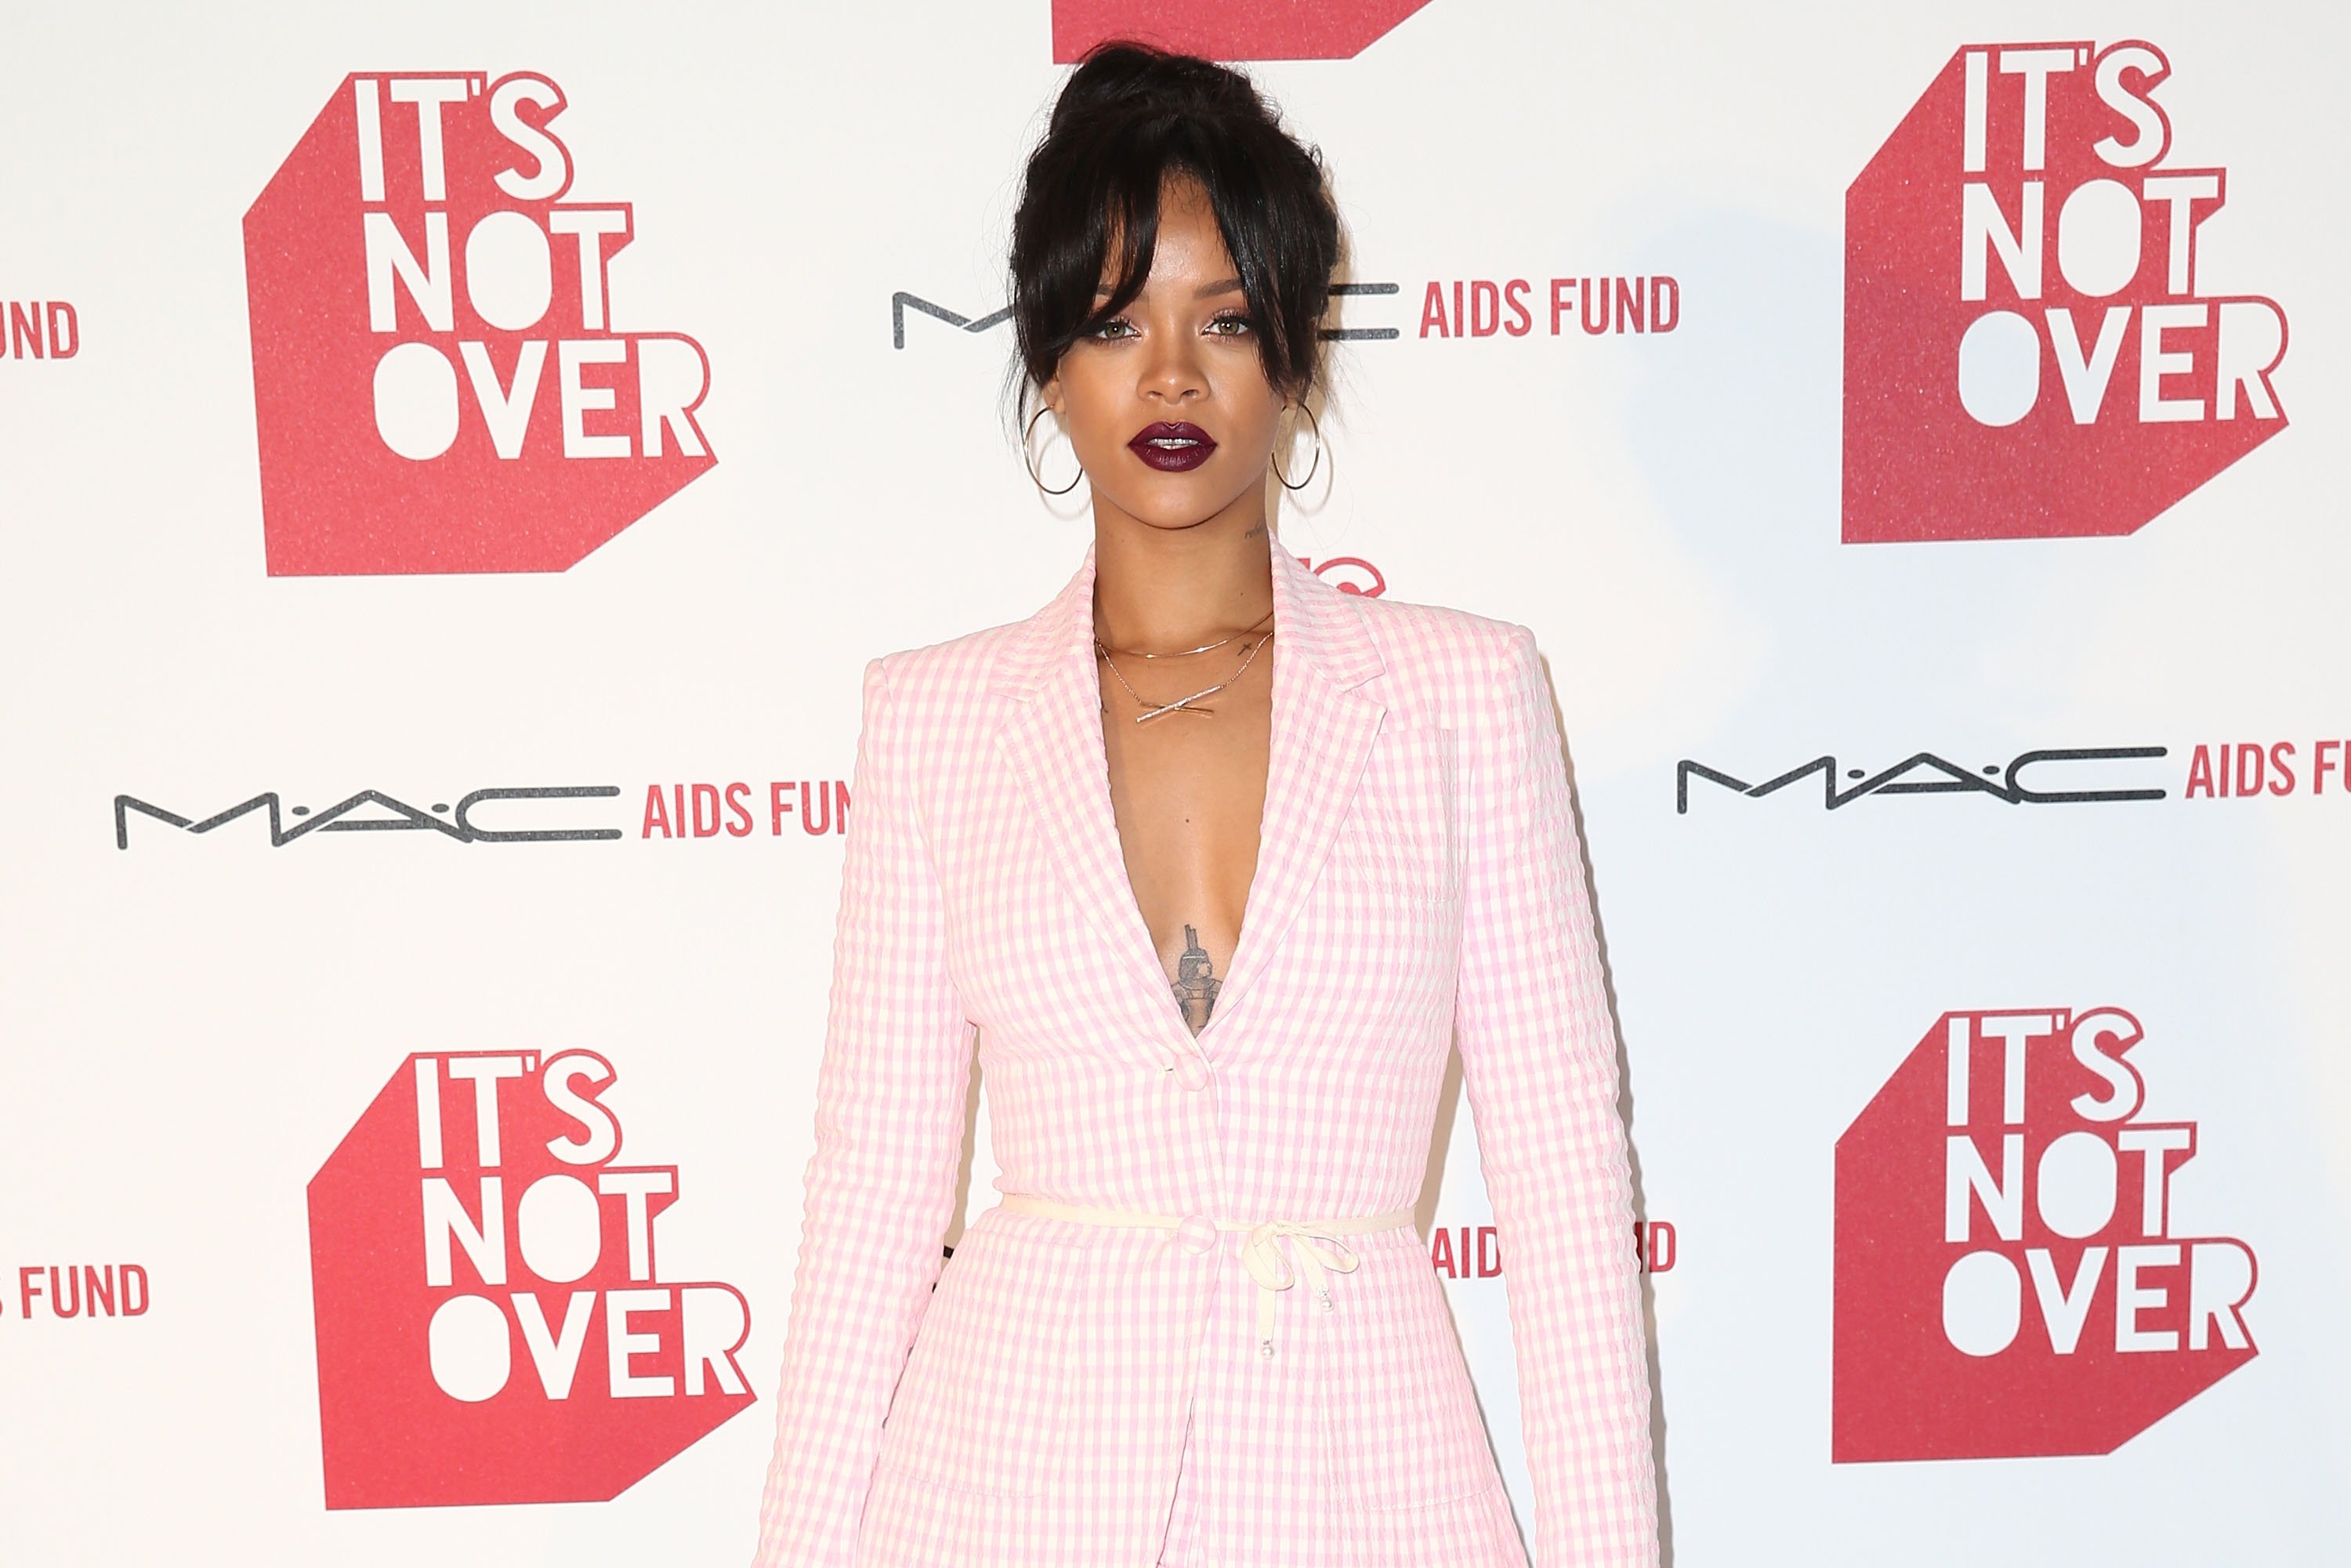  Rihanna attends the premiere of 'It's Not Over' presented by MAC Cosmetics and MAC AIDS Fund at Quixote Studios on November 18, 2014. | Photo: GettyImages